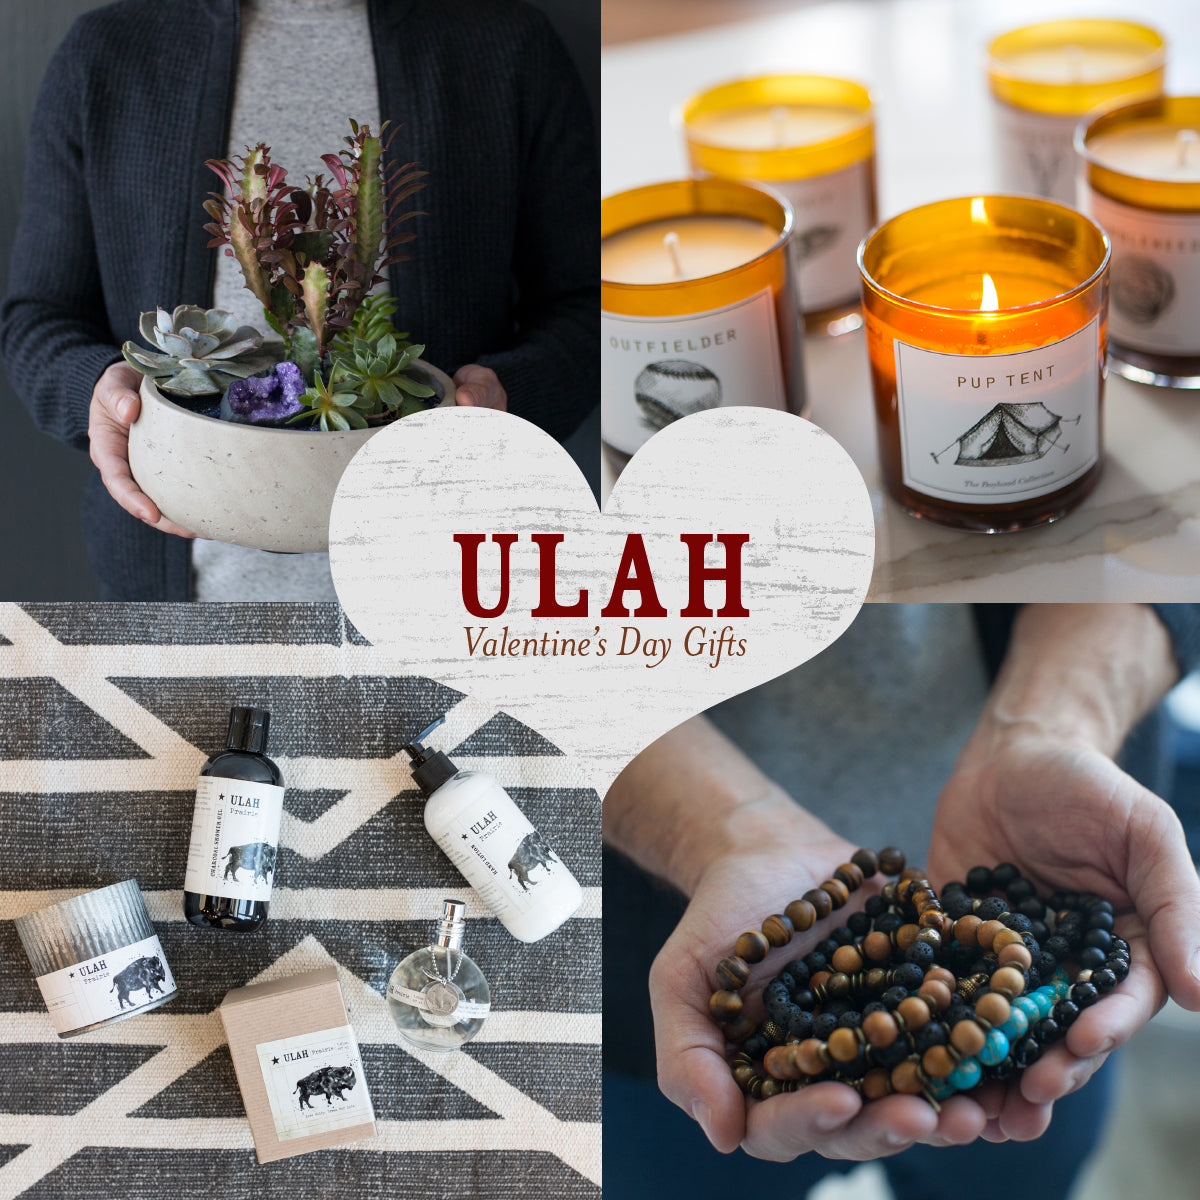 The ULAH Valentine's Day Gift Guide for 2018